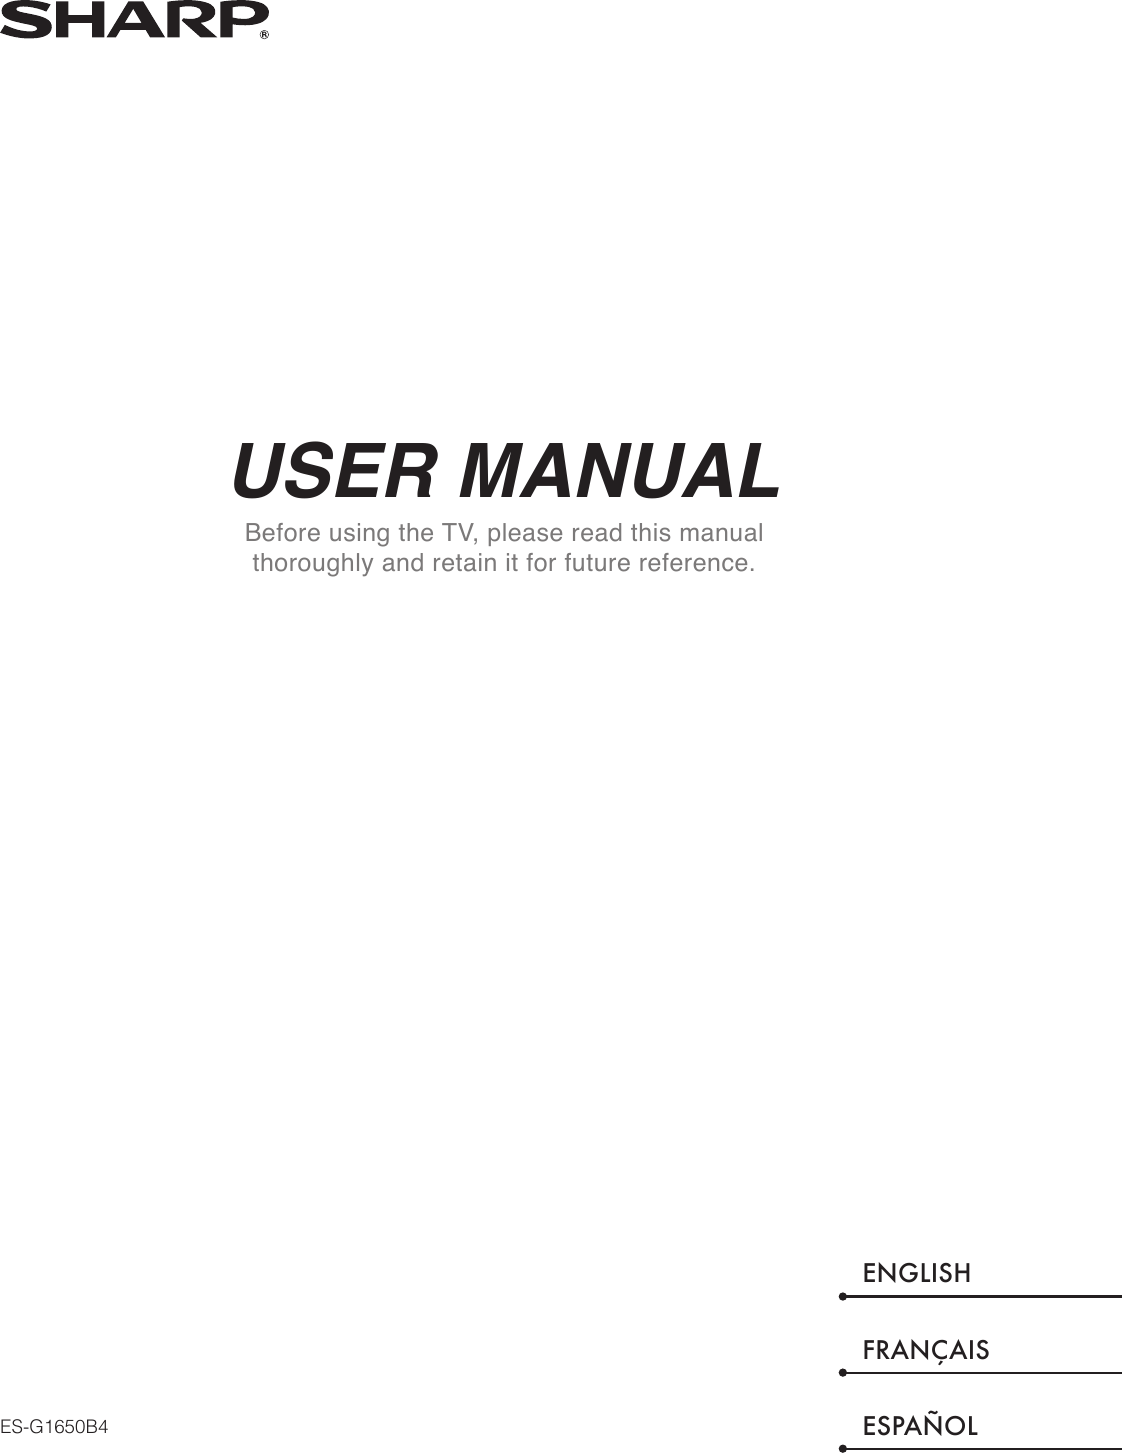 USER MANUALBefore using the TV, please read this manual thoroughly and retain it for future reference.ENGLISHFRANÇAISESPAÑOLES-G1650B4